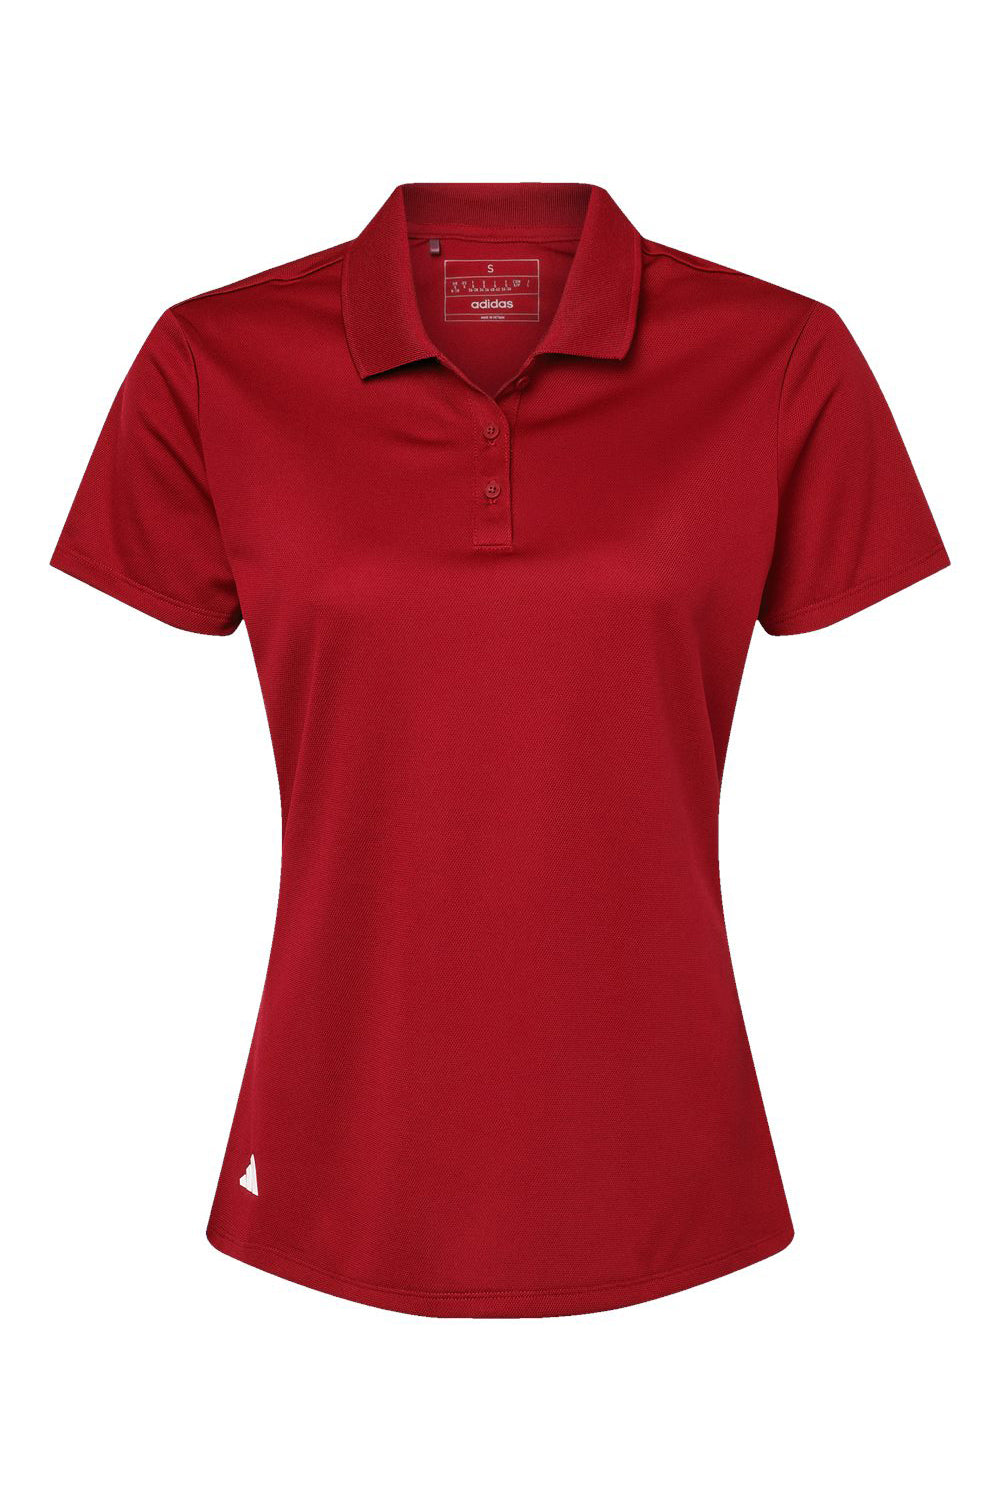 Adidas A431 Womens Basic Short Sleeve Polo Shirt Power Red Flat Front